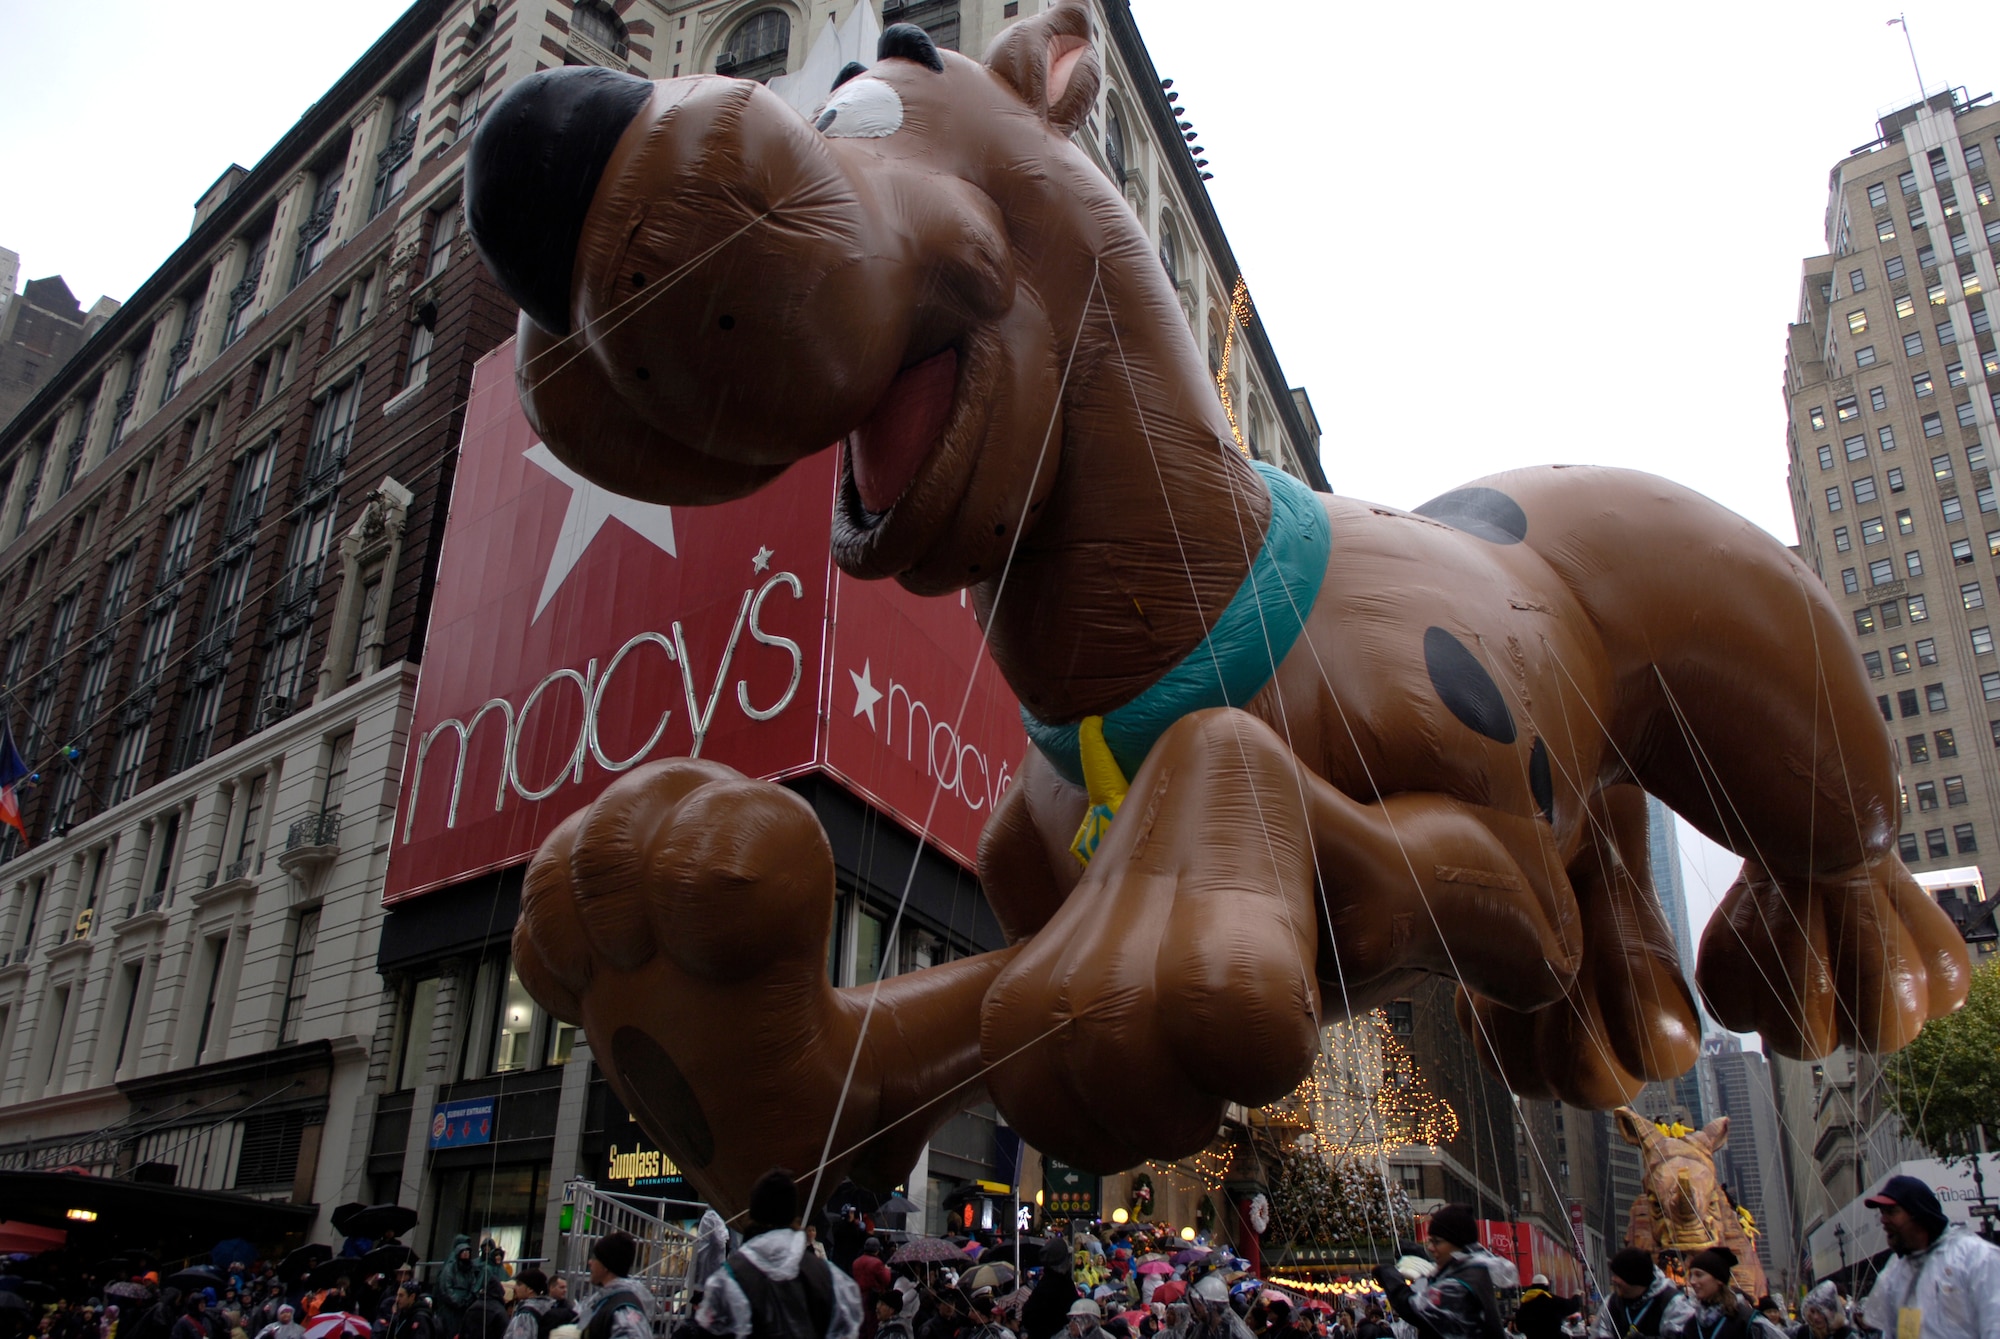 The Scooby-Doo balloon rounds the corner of Broadway and 34th Street at the 80th Macy's Thanksgiving Day Parade in New York City, N.Y., Nov. 23.  The U.S. Air Force Academy Marching Band participated in the parade. (U.S. Air Force photo/Senior Airman Brian Ferguson)
